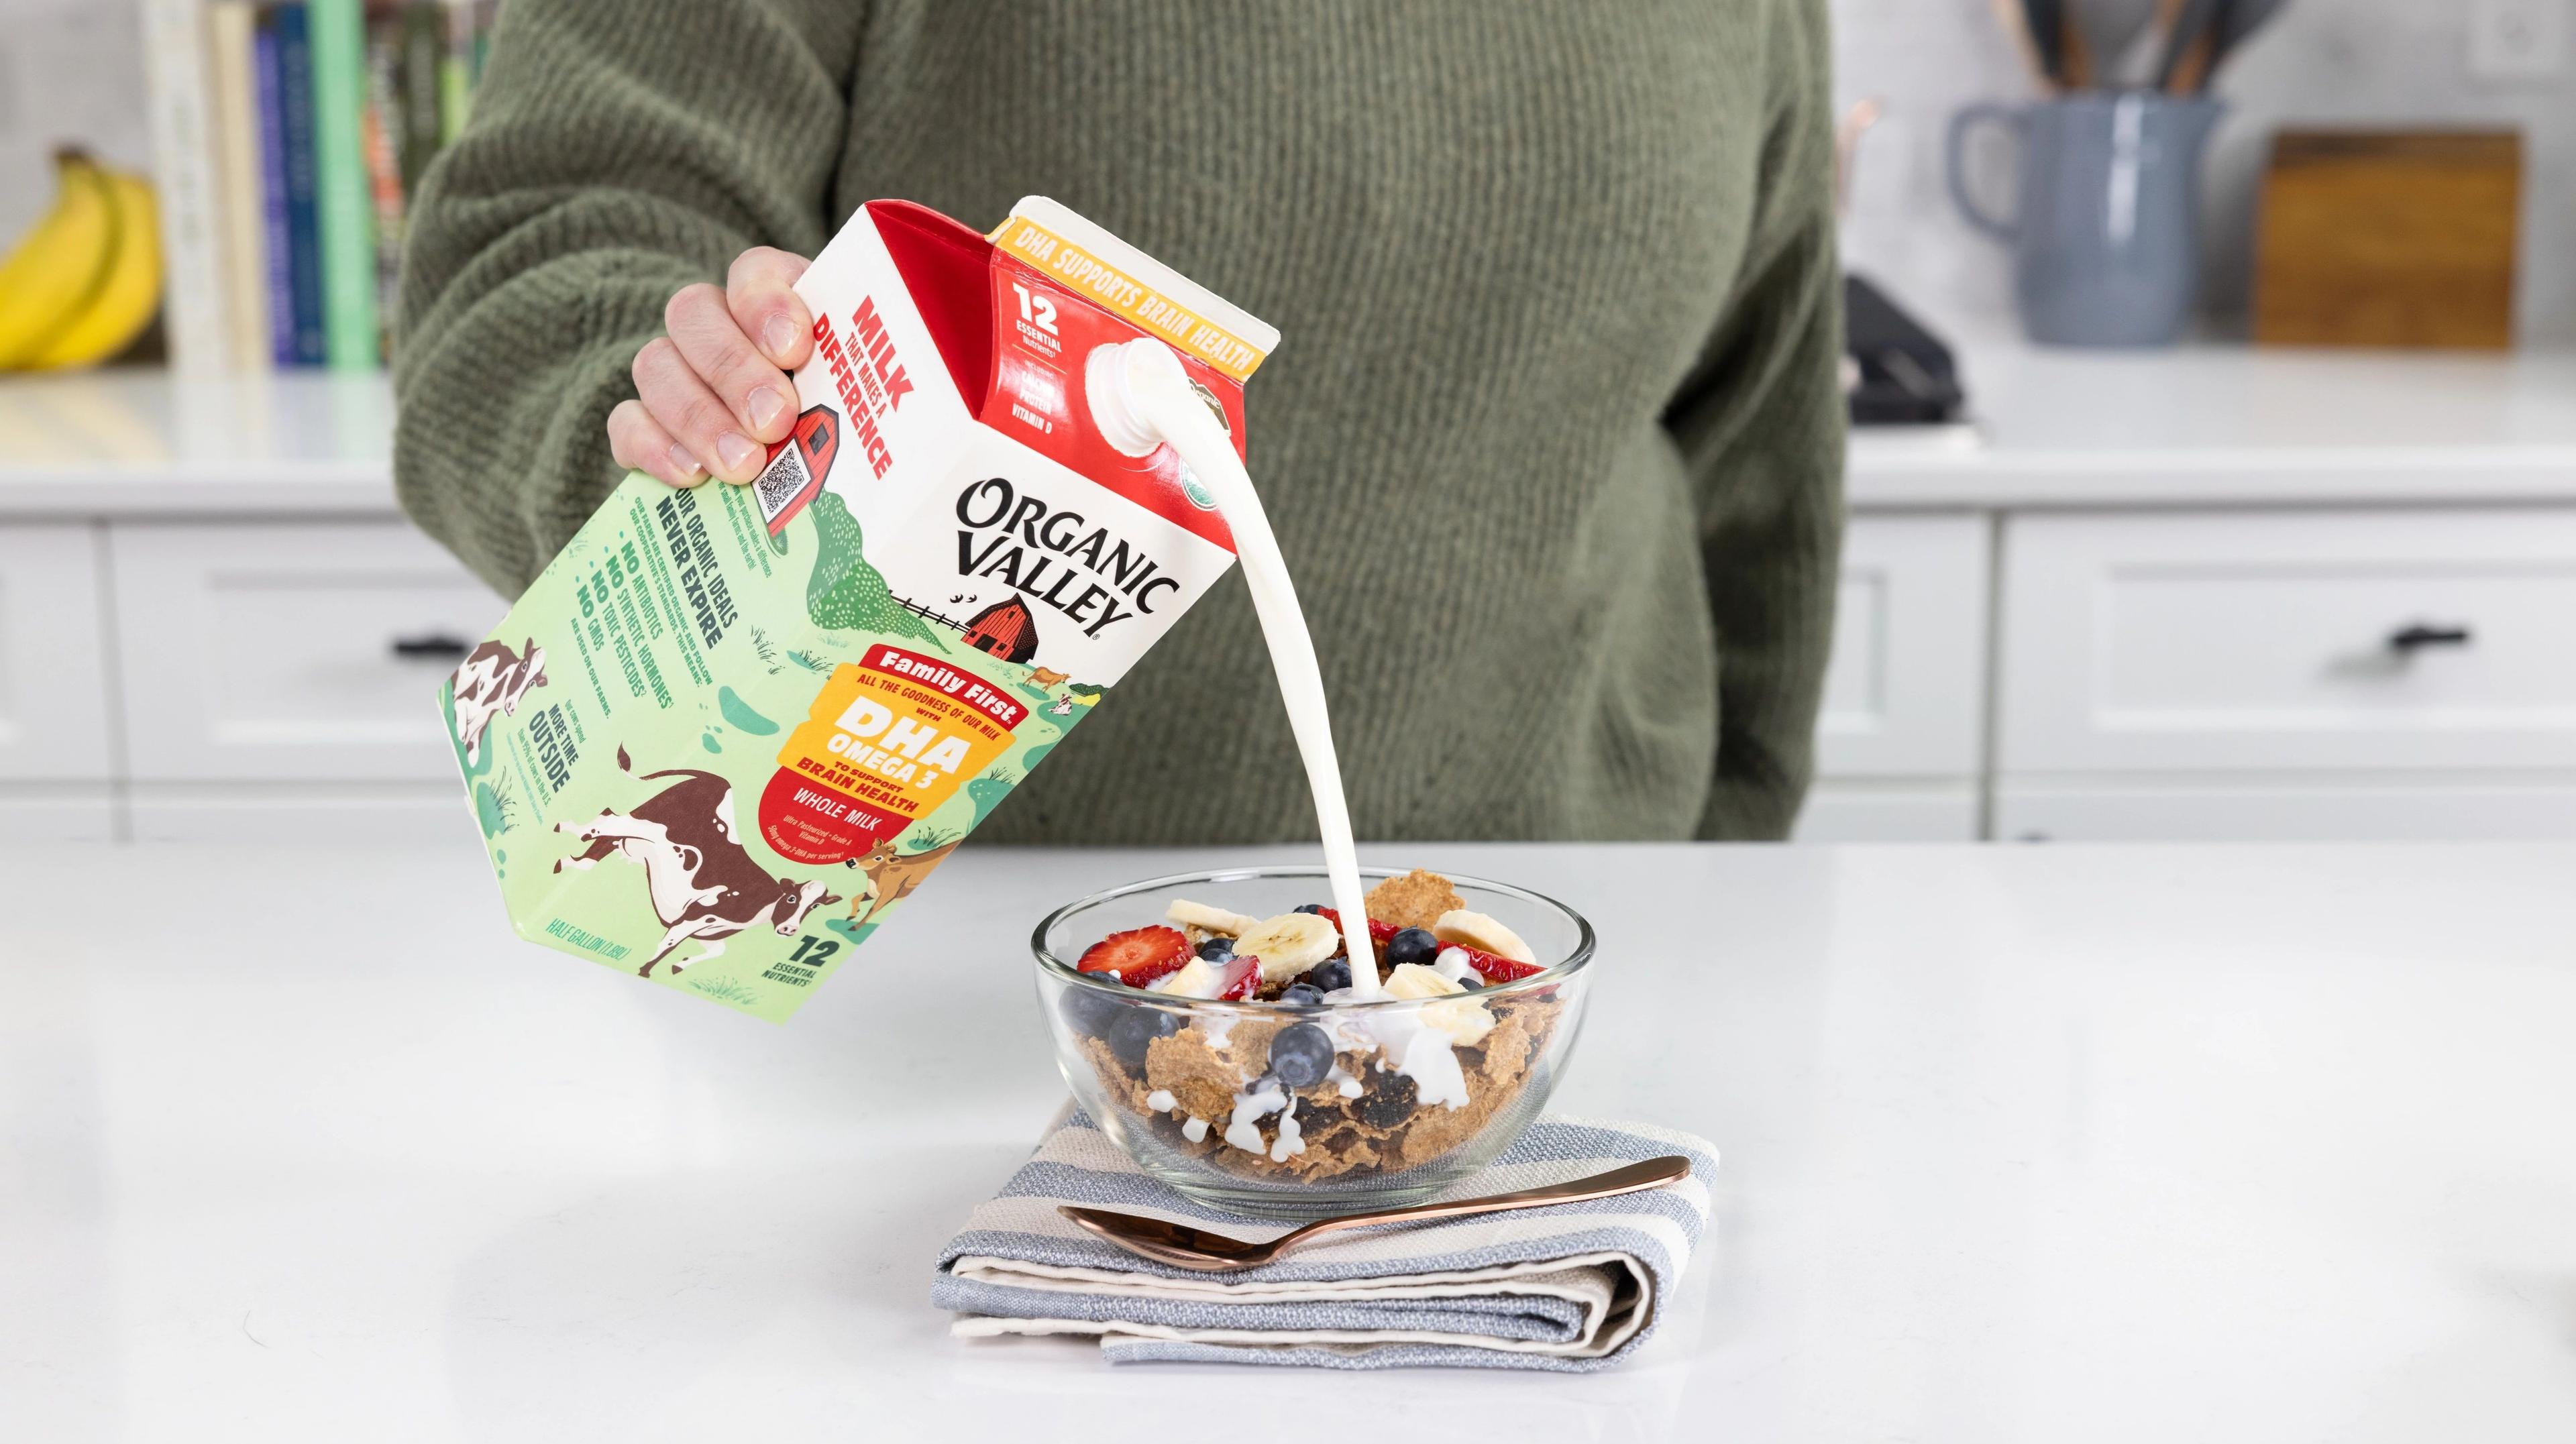 A person pours Family First organic milk into a bowl of cereal with strawberries, bananas and blueberries.